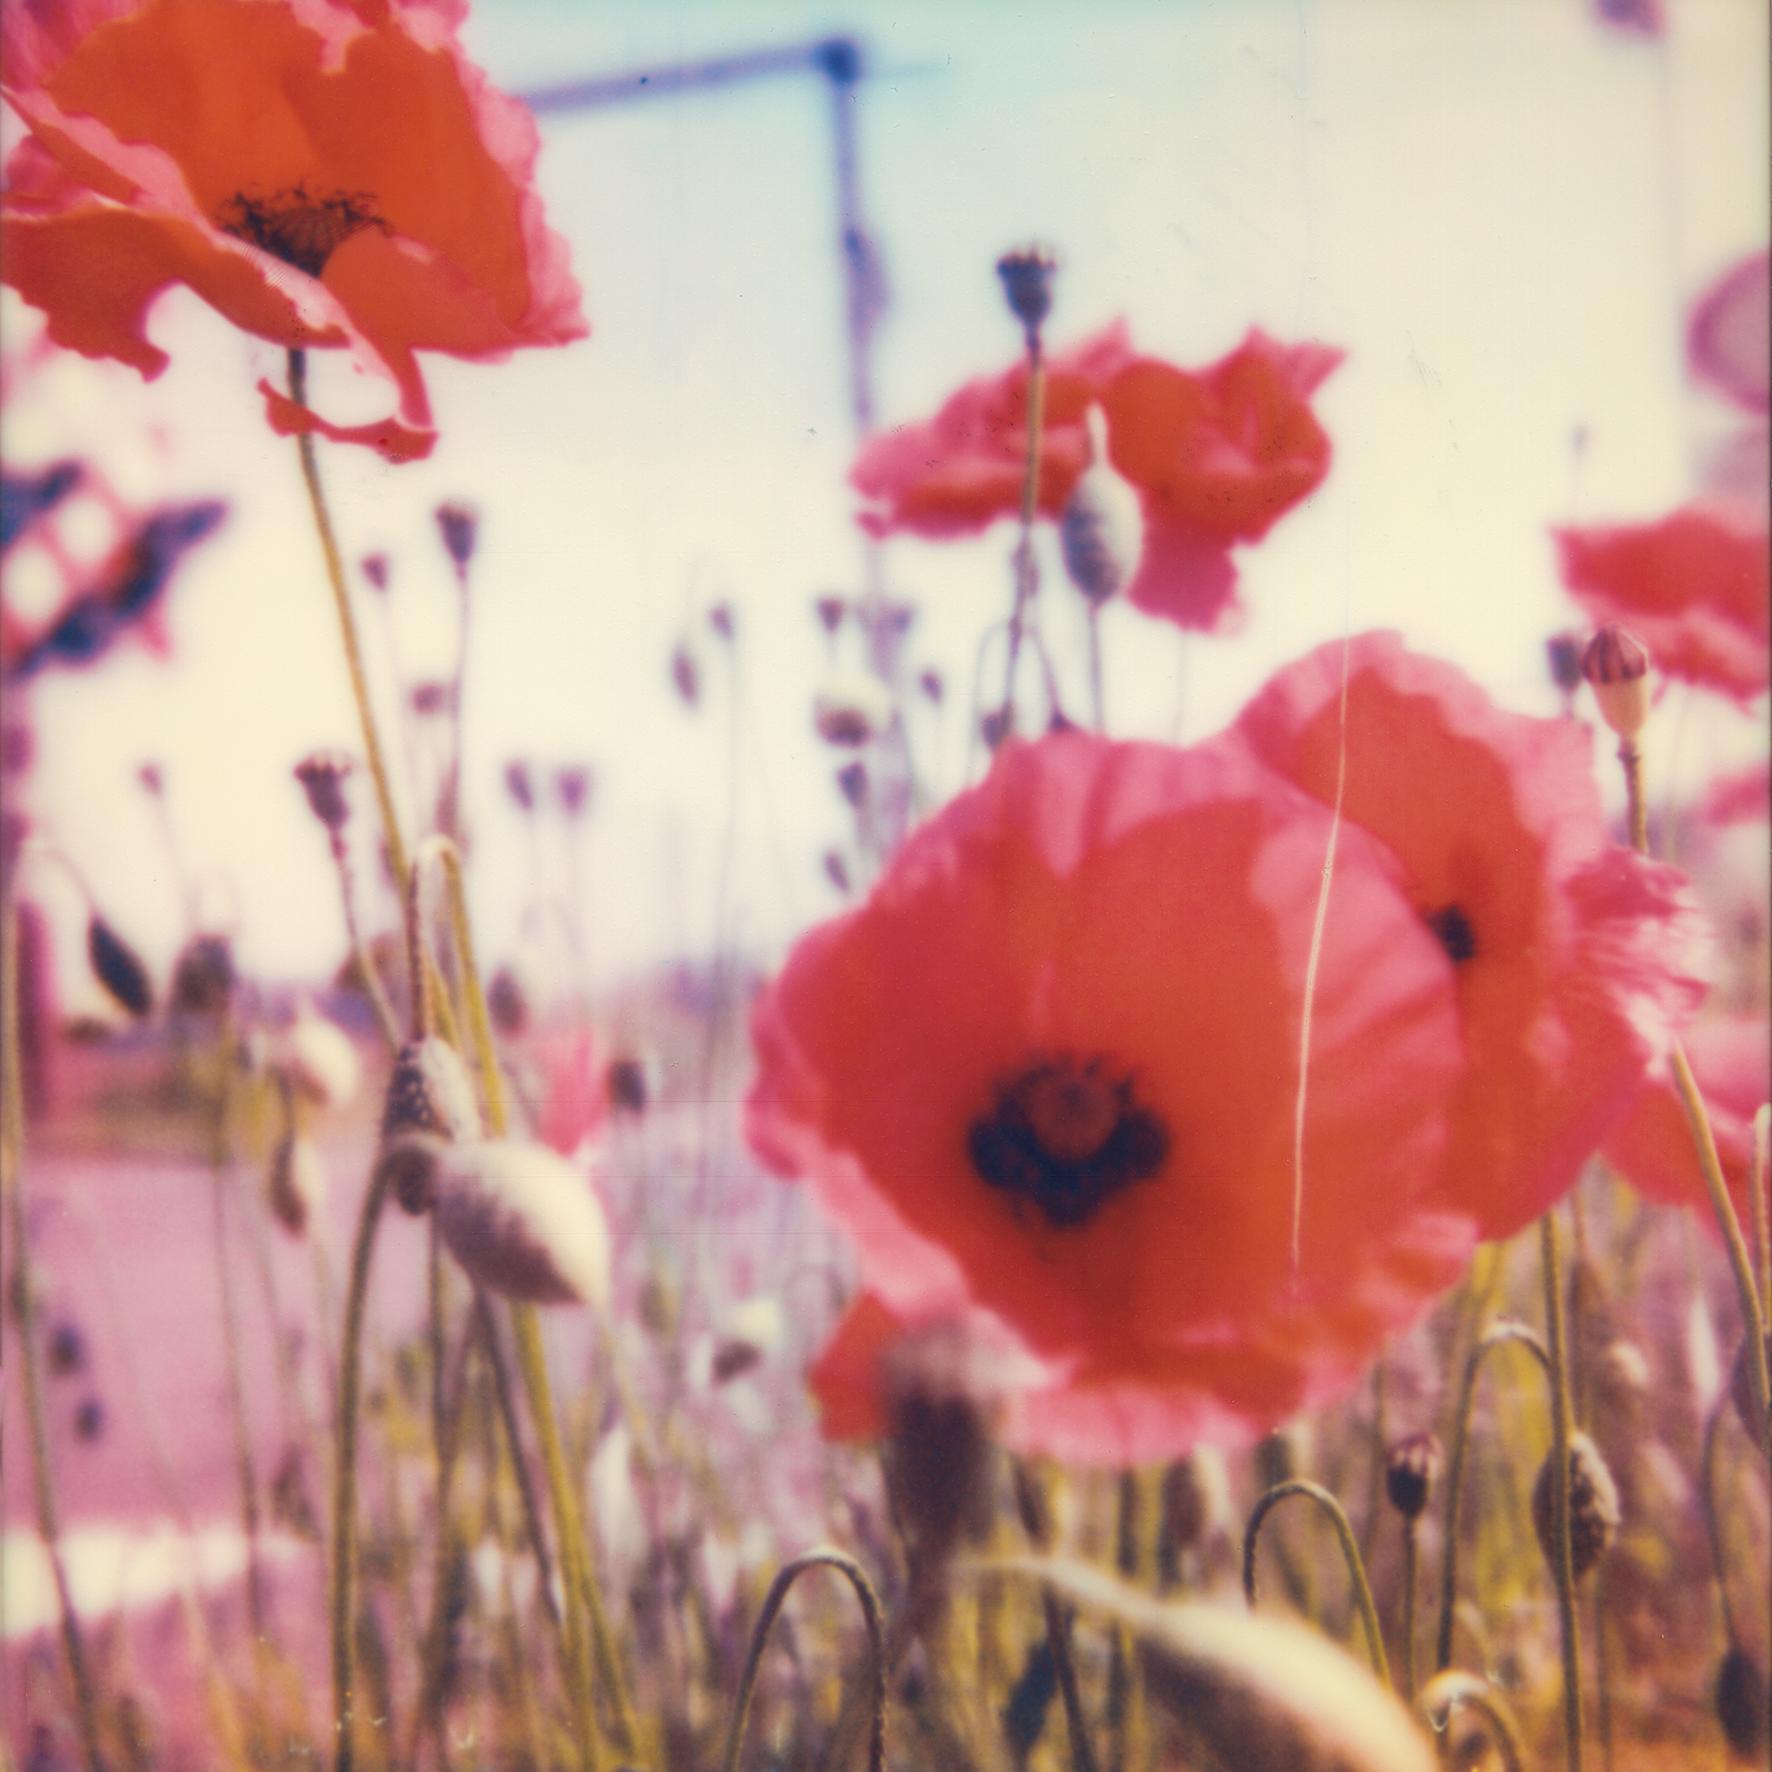 Carmen de Vos Color Photograph - Poppy Realm #02 [From the series Wild Things]